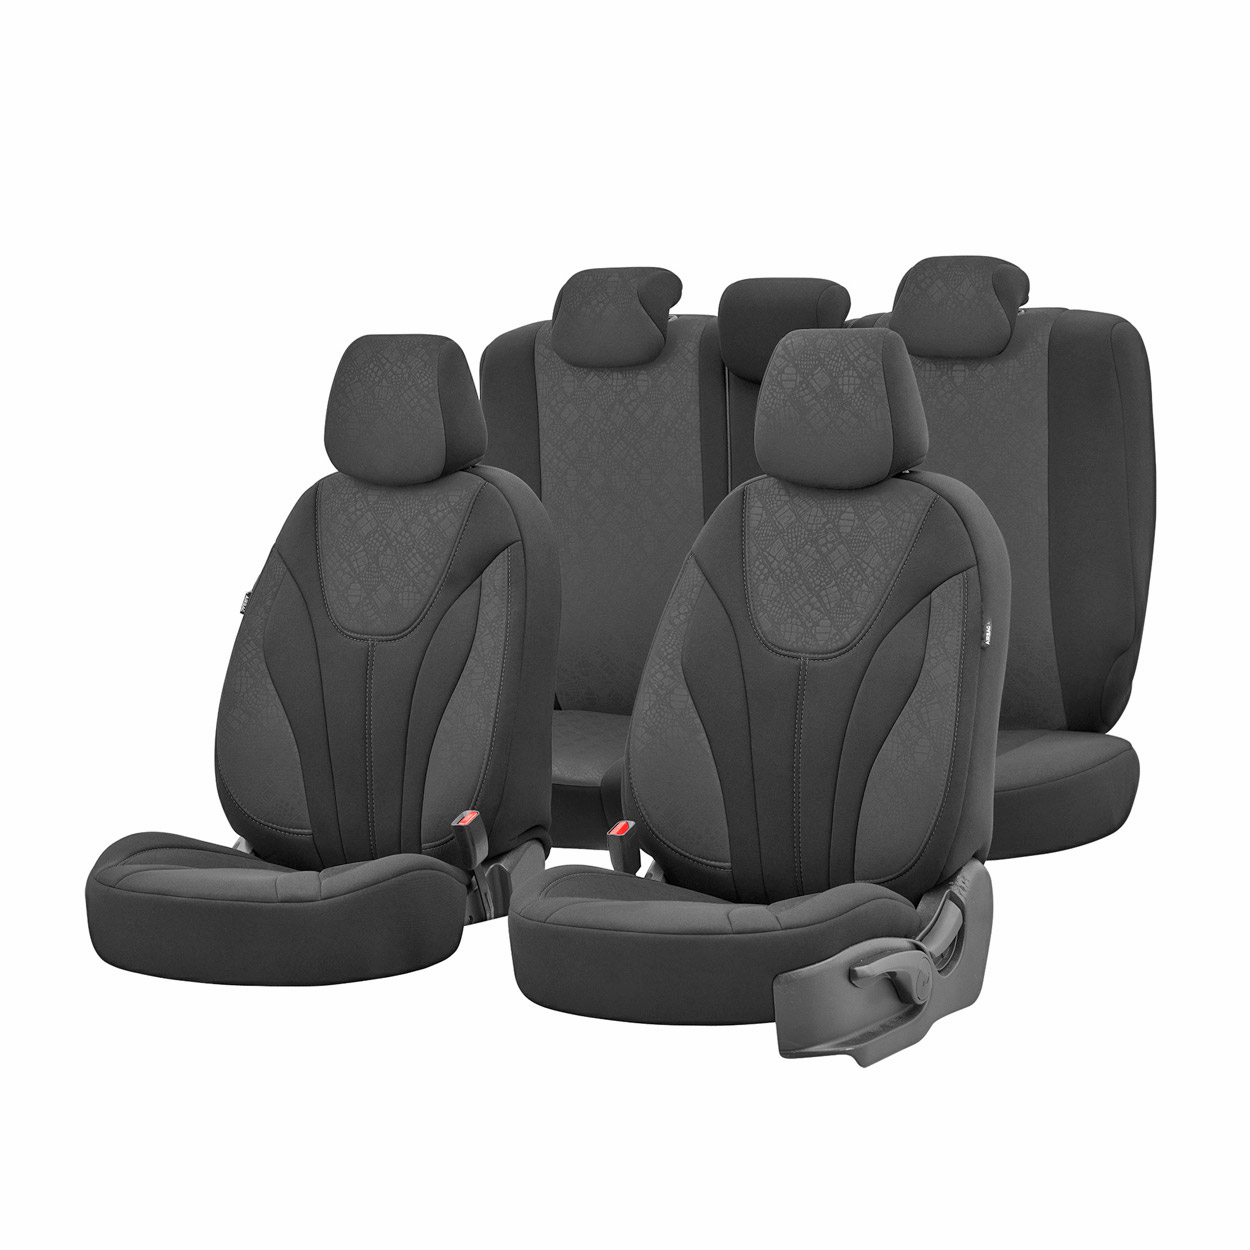 Universal car seat cover set front and rear RUBY design 1201